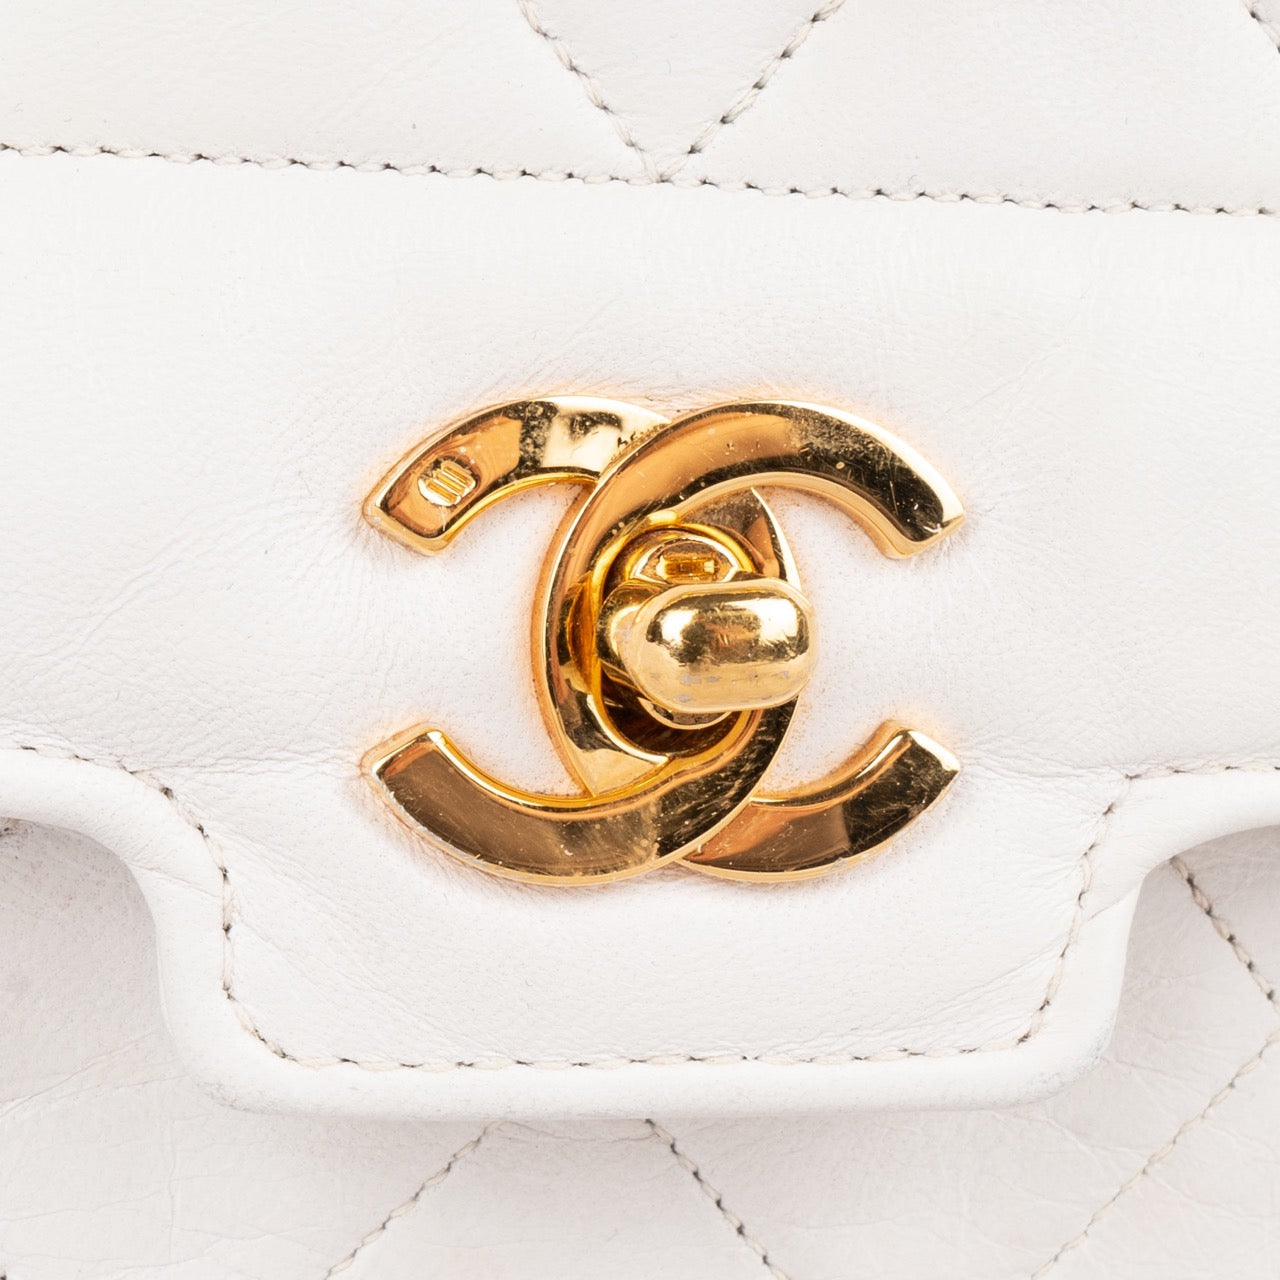 Chanel Quilted Lambskin 24K Gold Single Crossbody Flap Bag